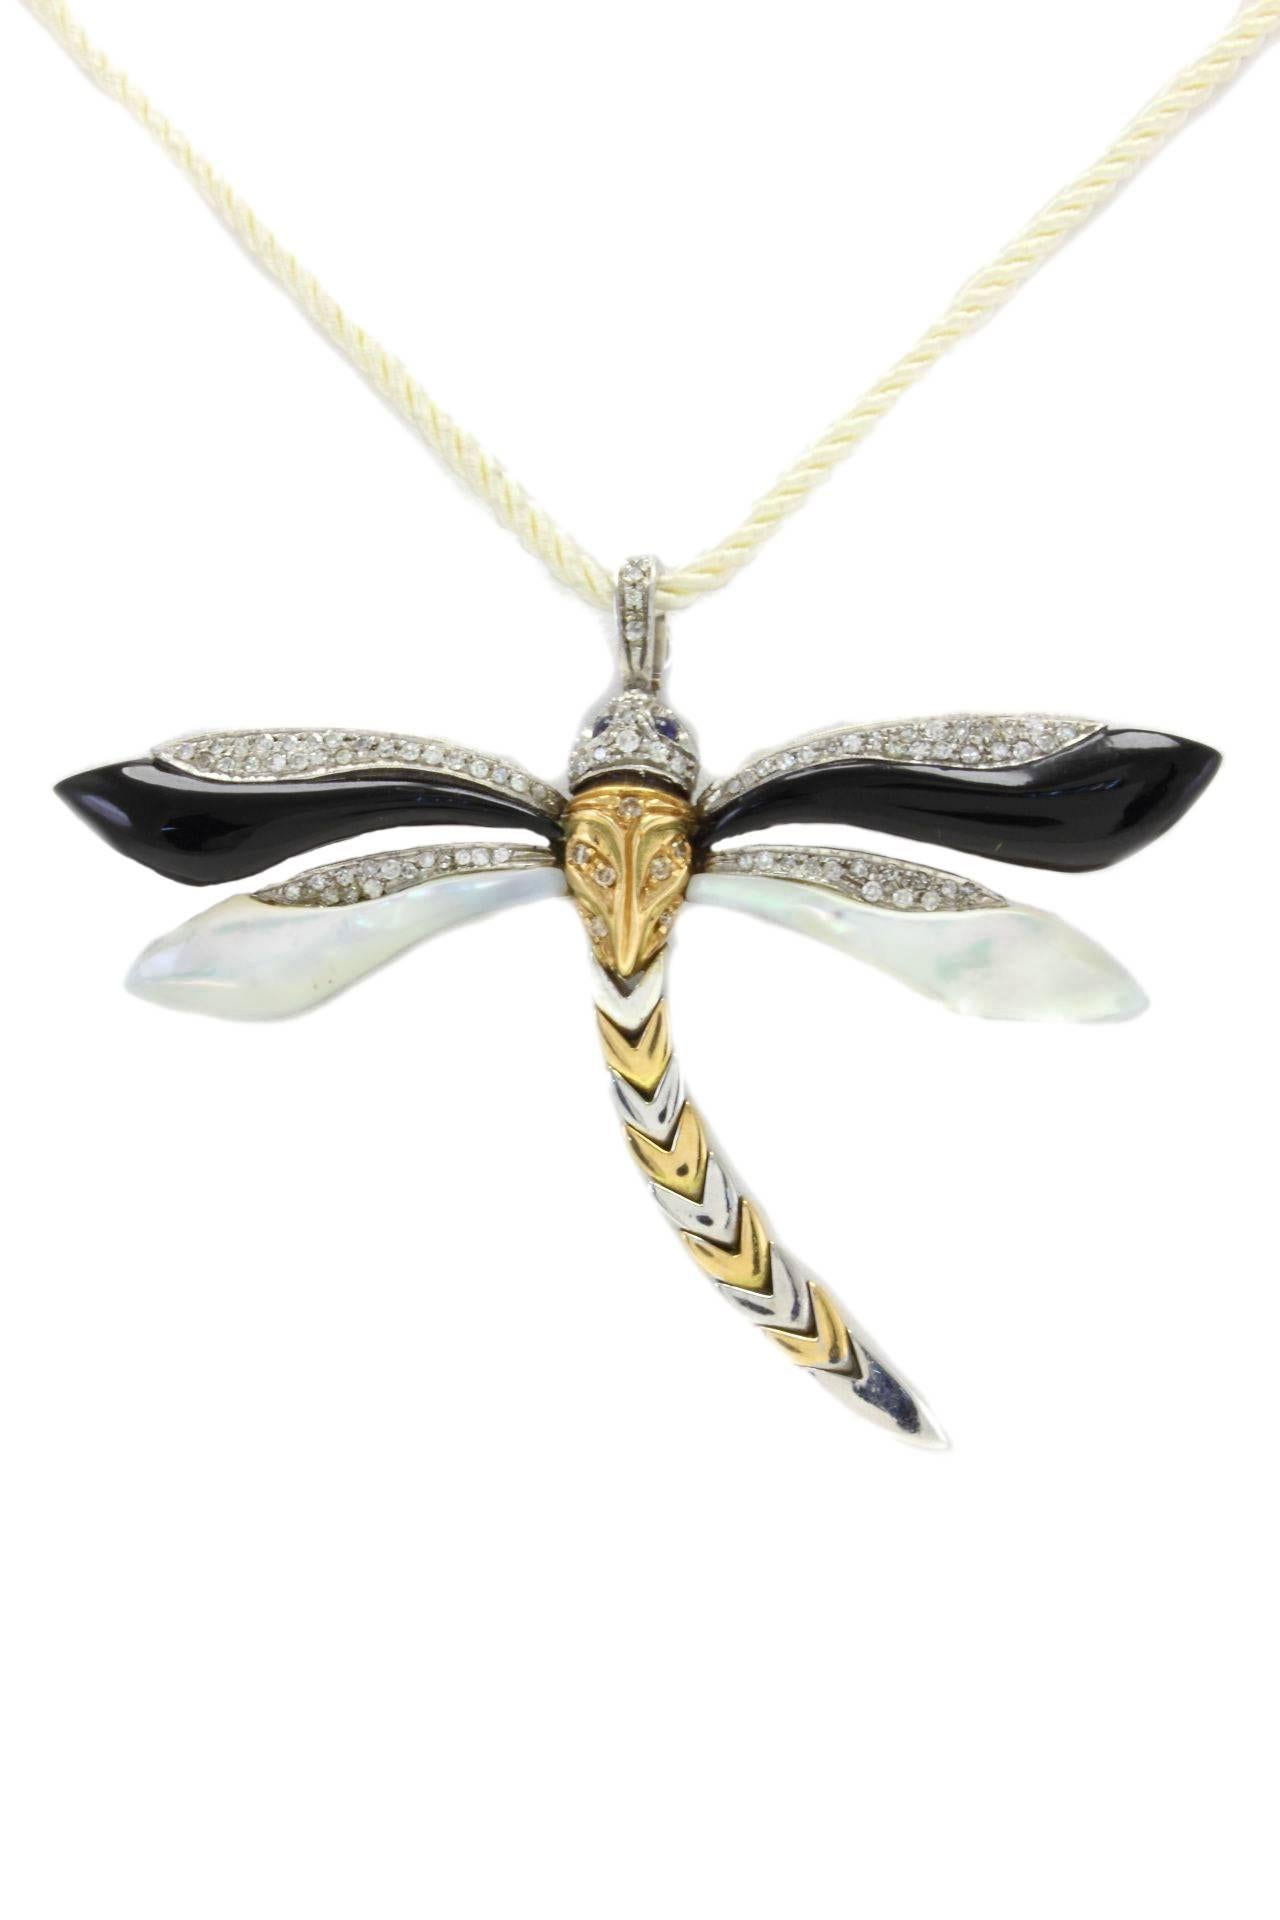 SHIPPING POLICY:
No additional costs will be added to this order.
Shipping costs will be totally covered by the seller (customs duties included).

For any inquiries,please contact the seller through the message center.

Shiny dragonfly pendant in